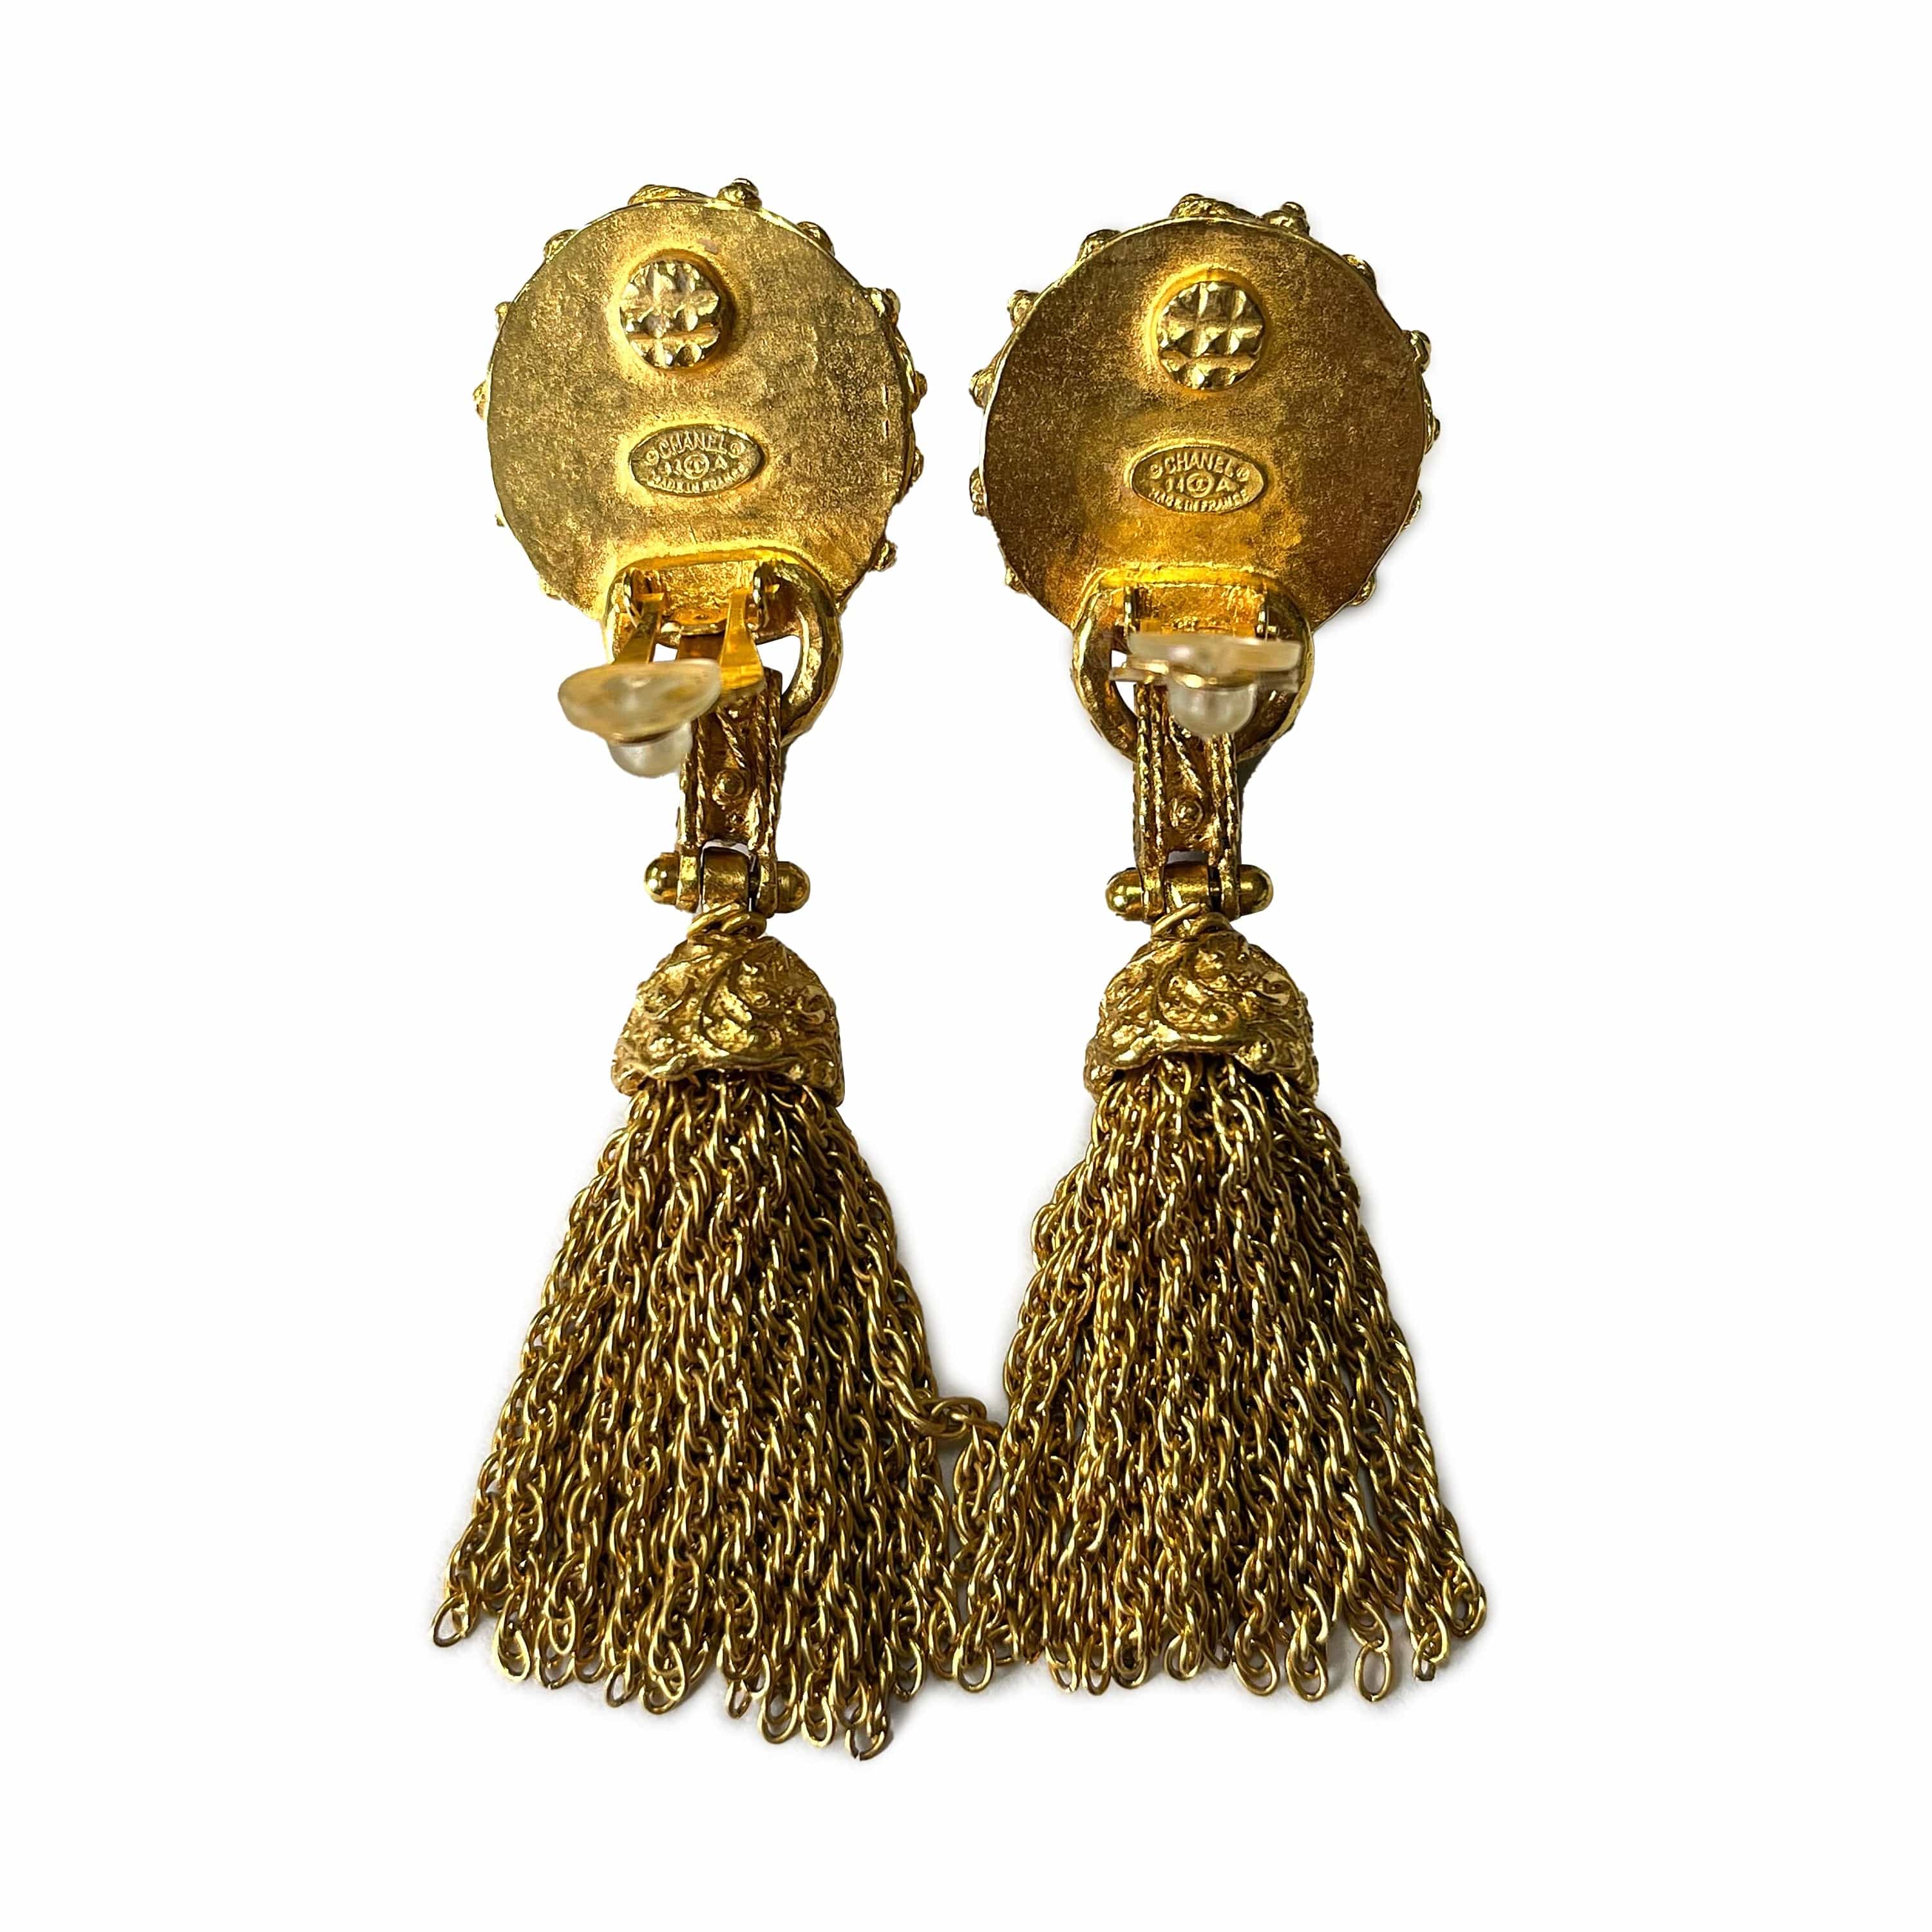 Chanel CHANEL VINTAGE EARRINGS COCOMARK FRINGE ACCESSORY 94A 90208981